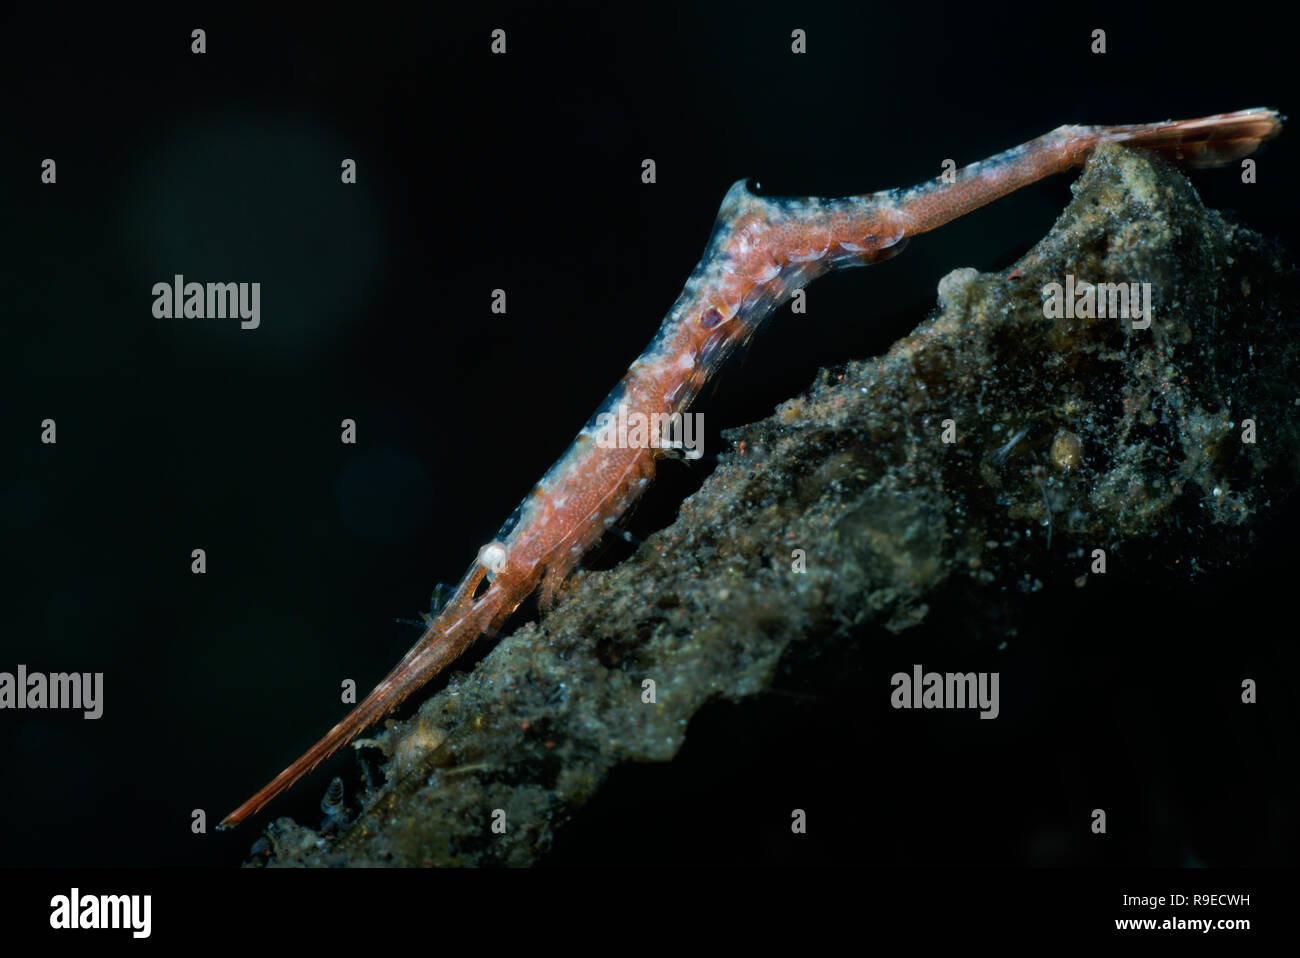 Ocellated tozeuma shrimp on a sandy hydroid in Indonesia Stock Photo